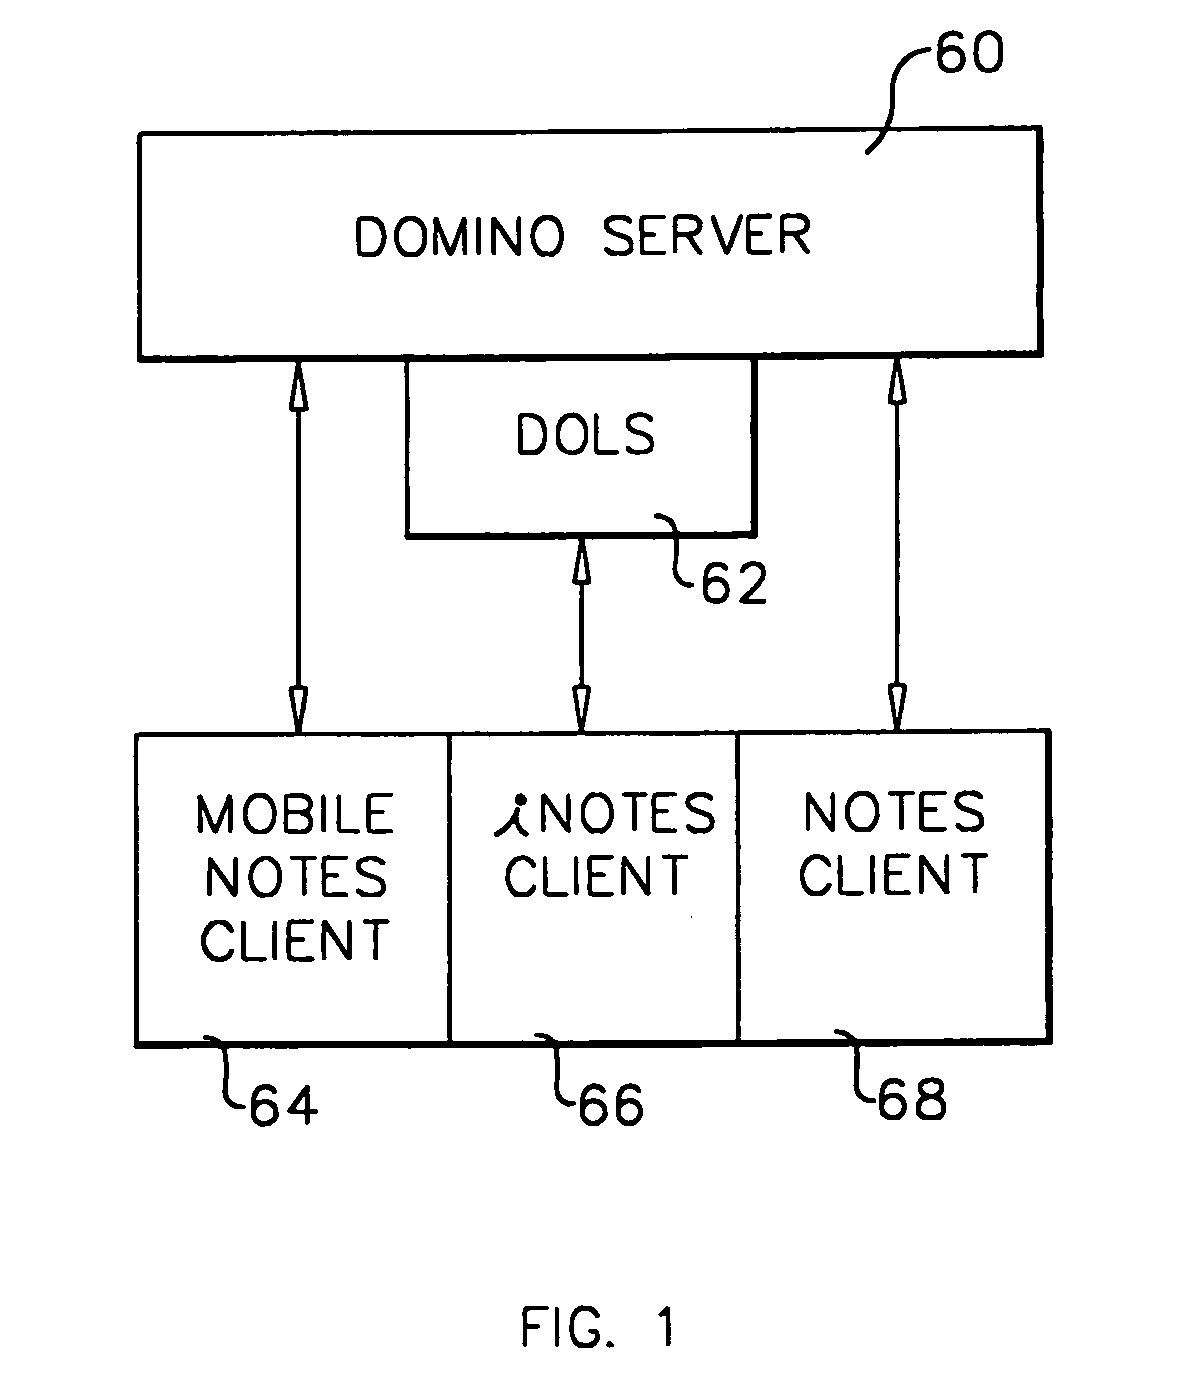 System and method for developing and administering web applications and services from a workflow, enterprise, and mail-enabled web application server and platform